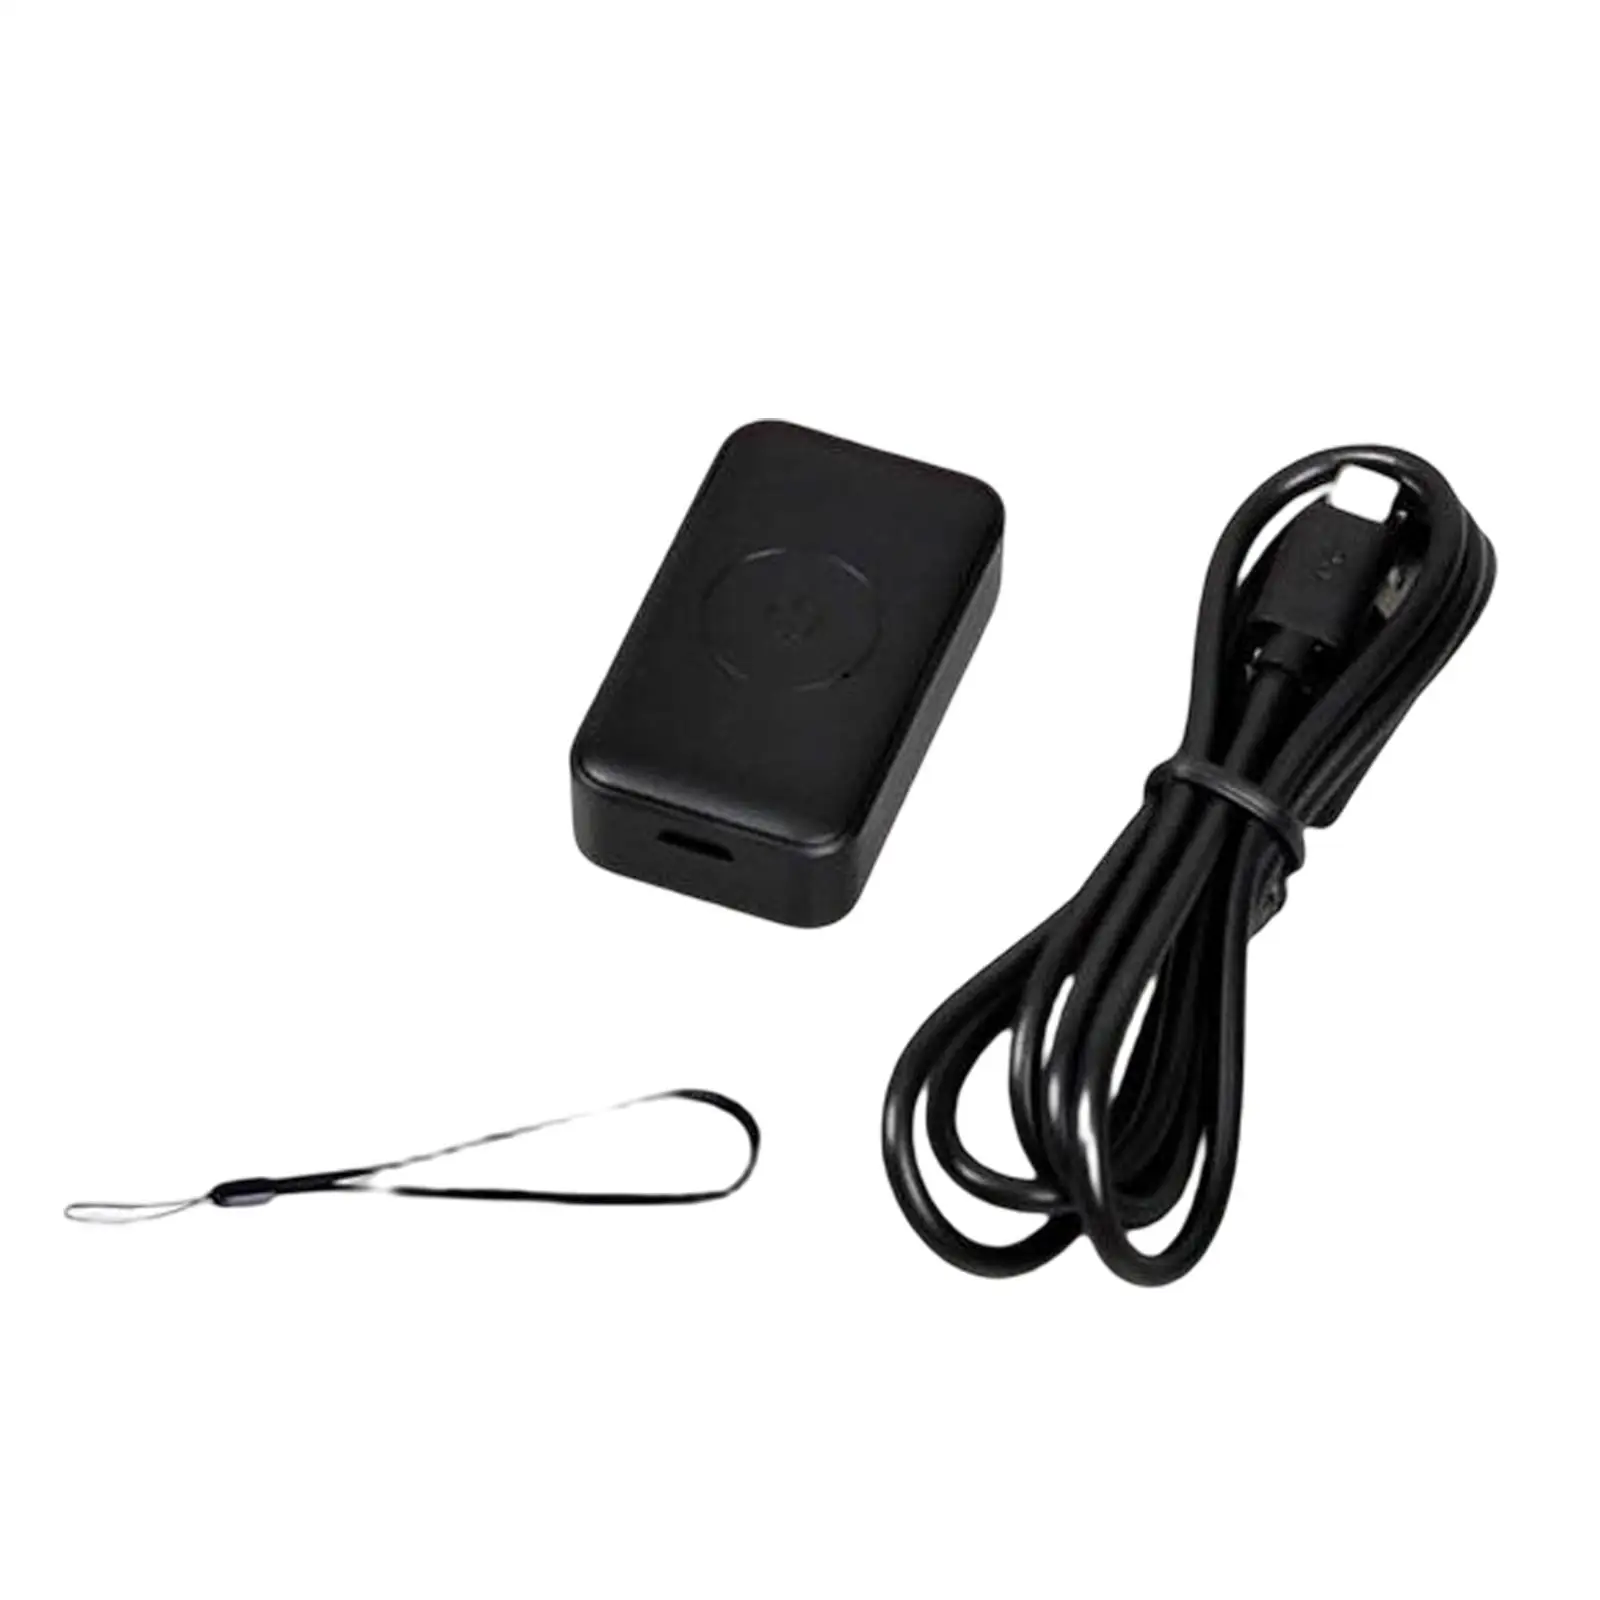 GPS Tracker Geo-Fence Real-Time SOS Call App Tum-On / Power-Off Tracking Device for Vehicles